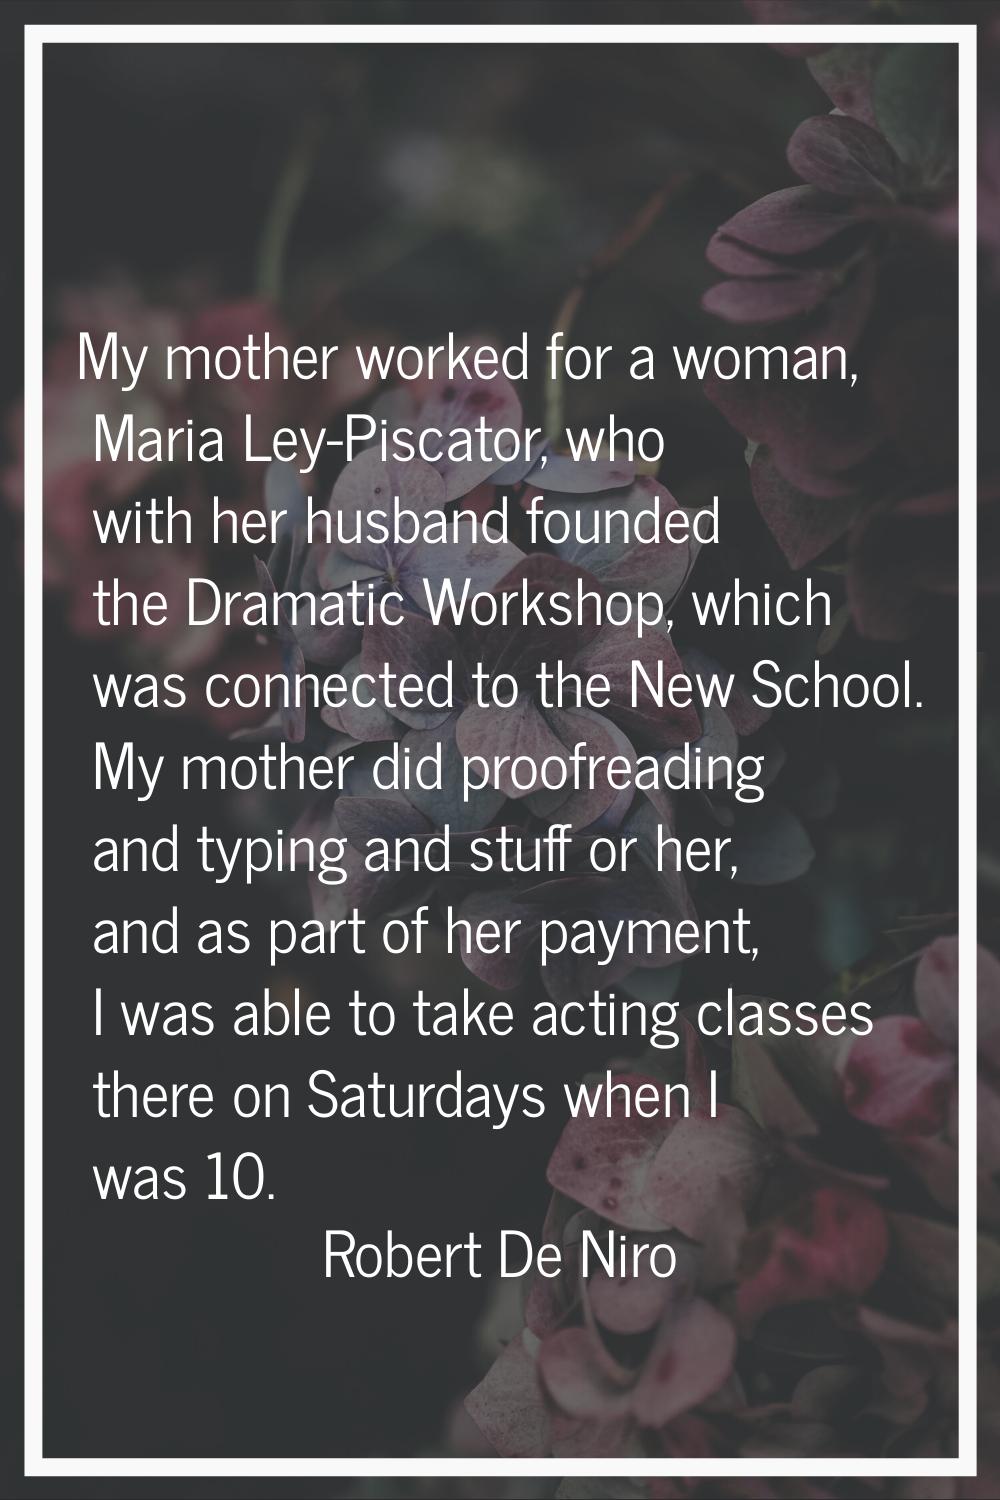 My mother worked for a woman, Maria Ley-Piscator, who with her husband founded the Dramatic Worksho